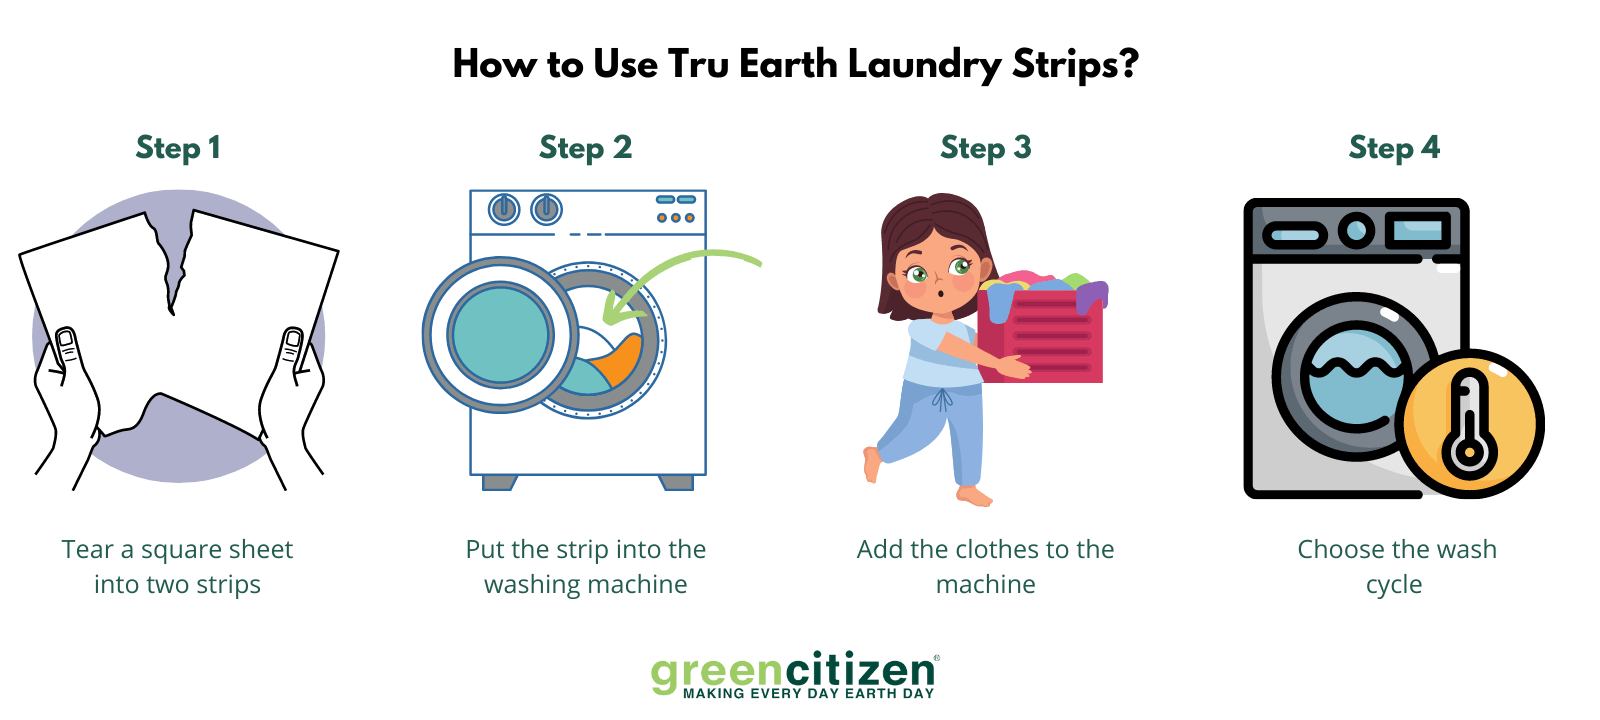 How to Use Tru Earth Laundry Strips